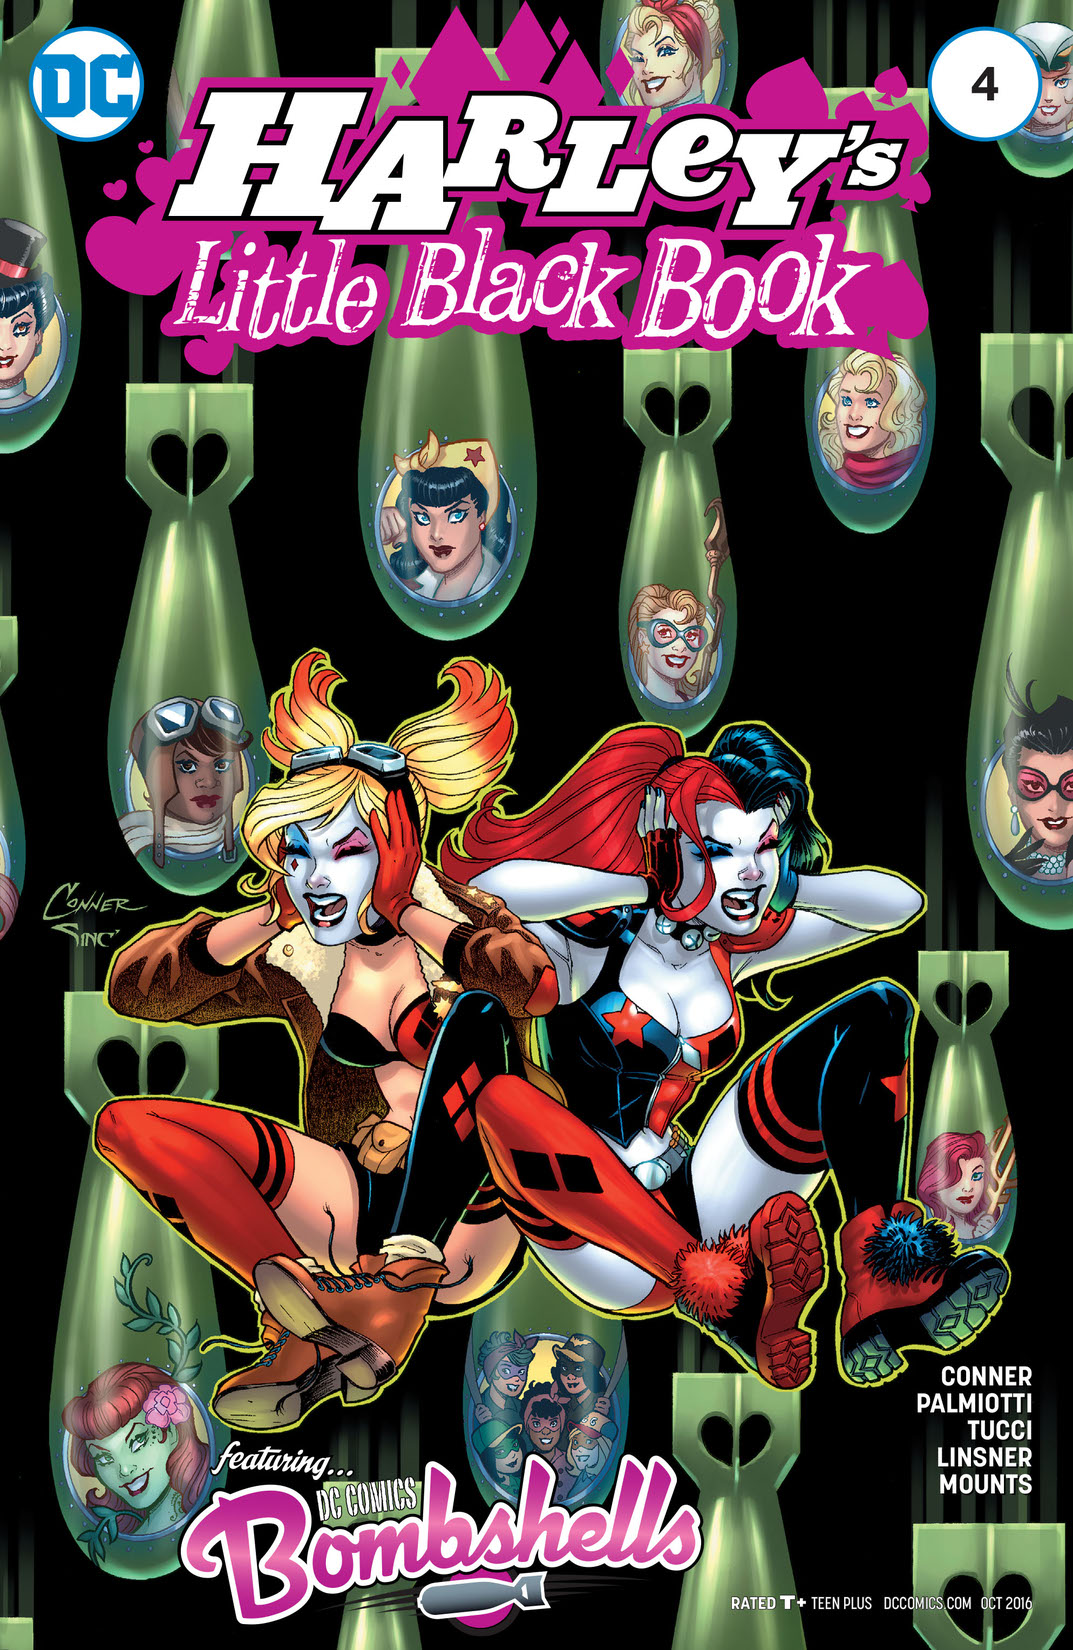 Harley's Little Black Book #4 preview images